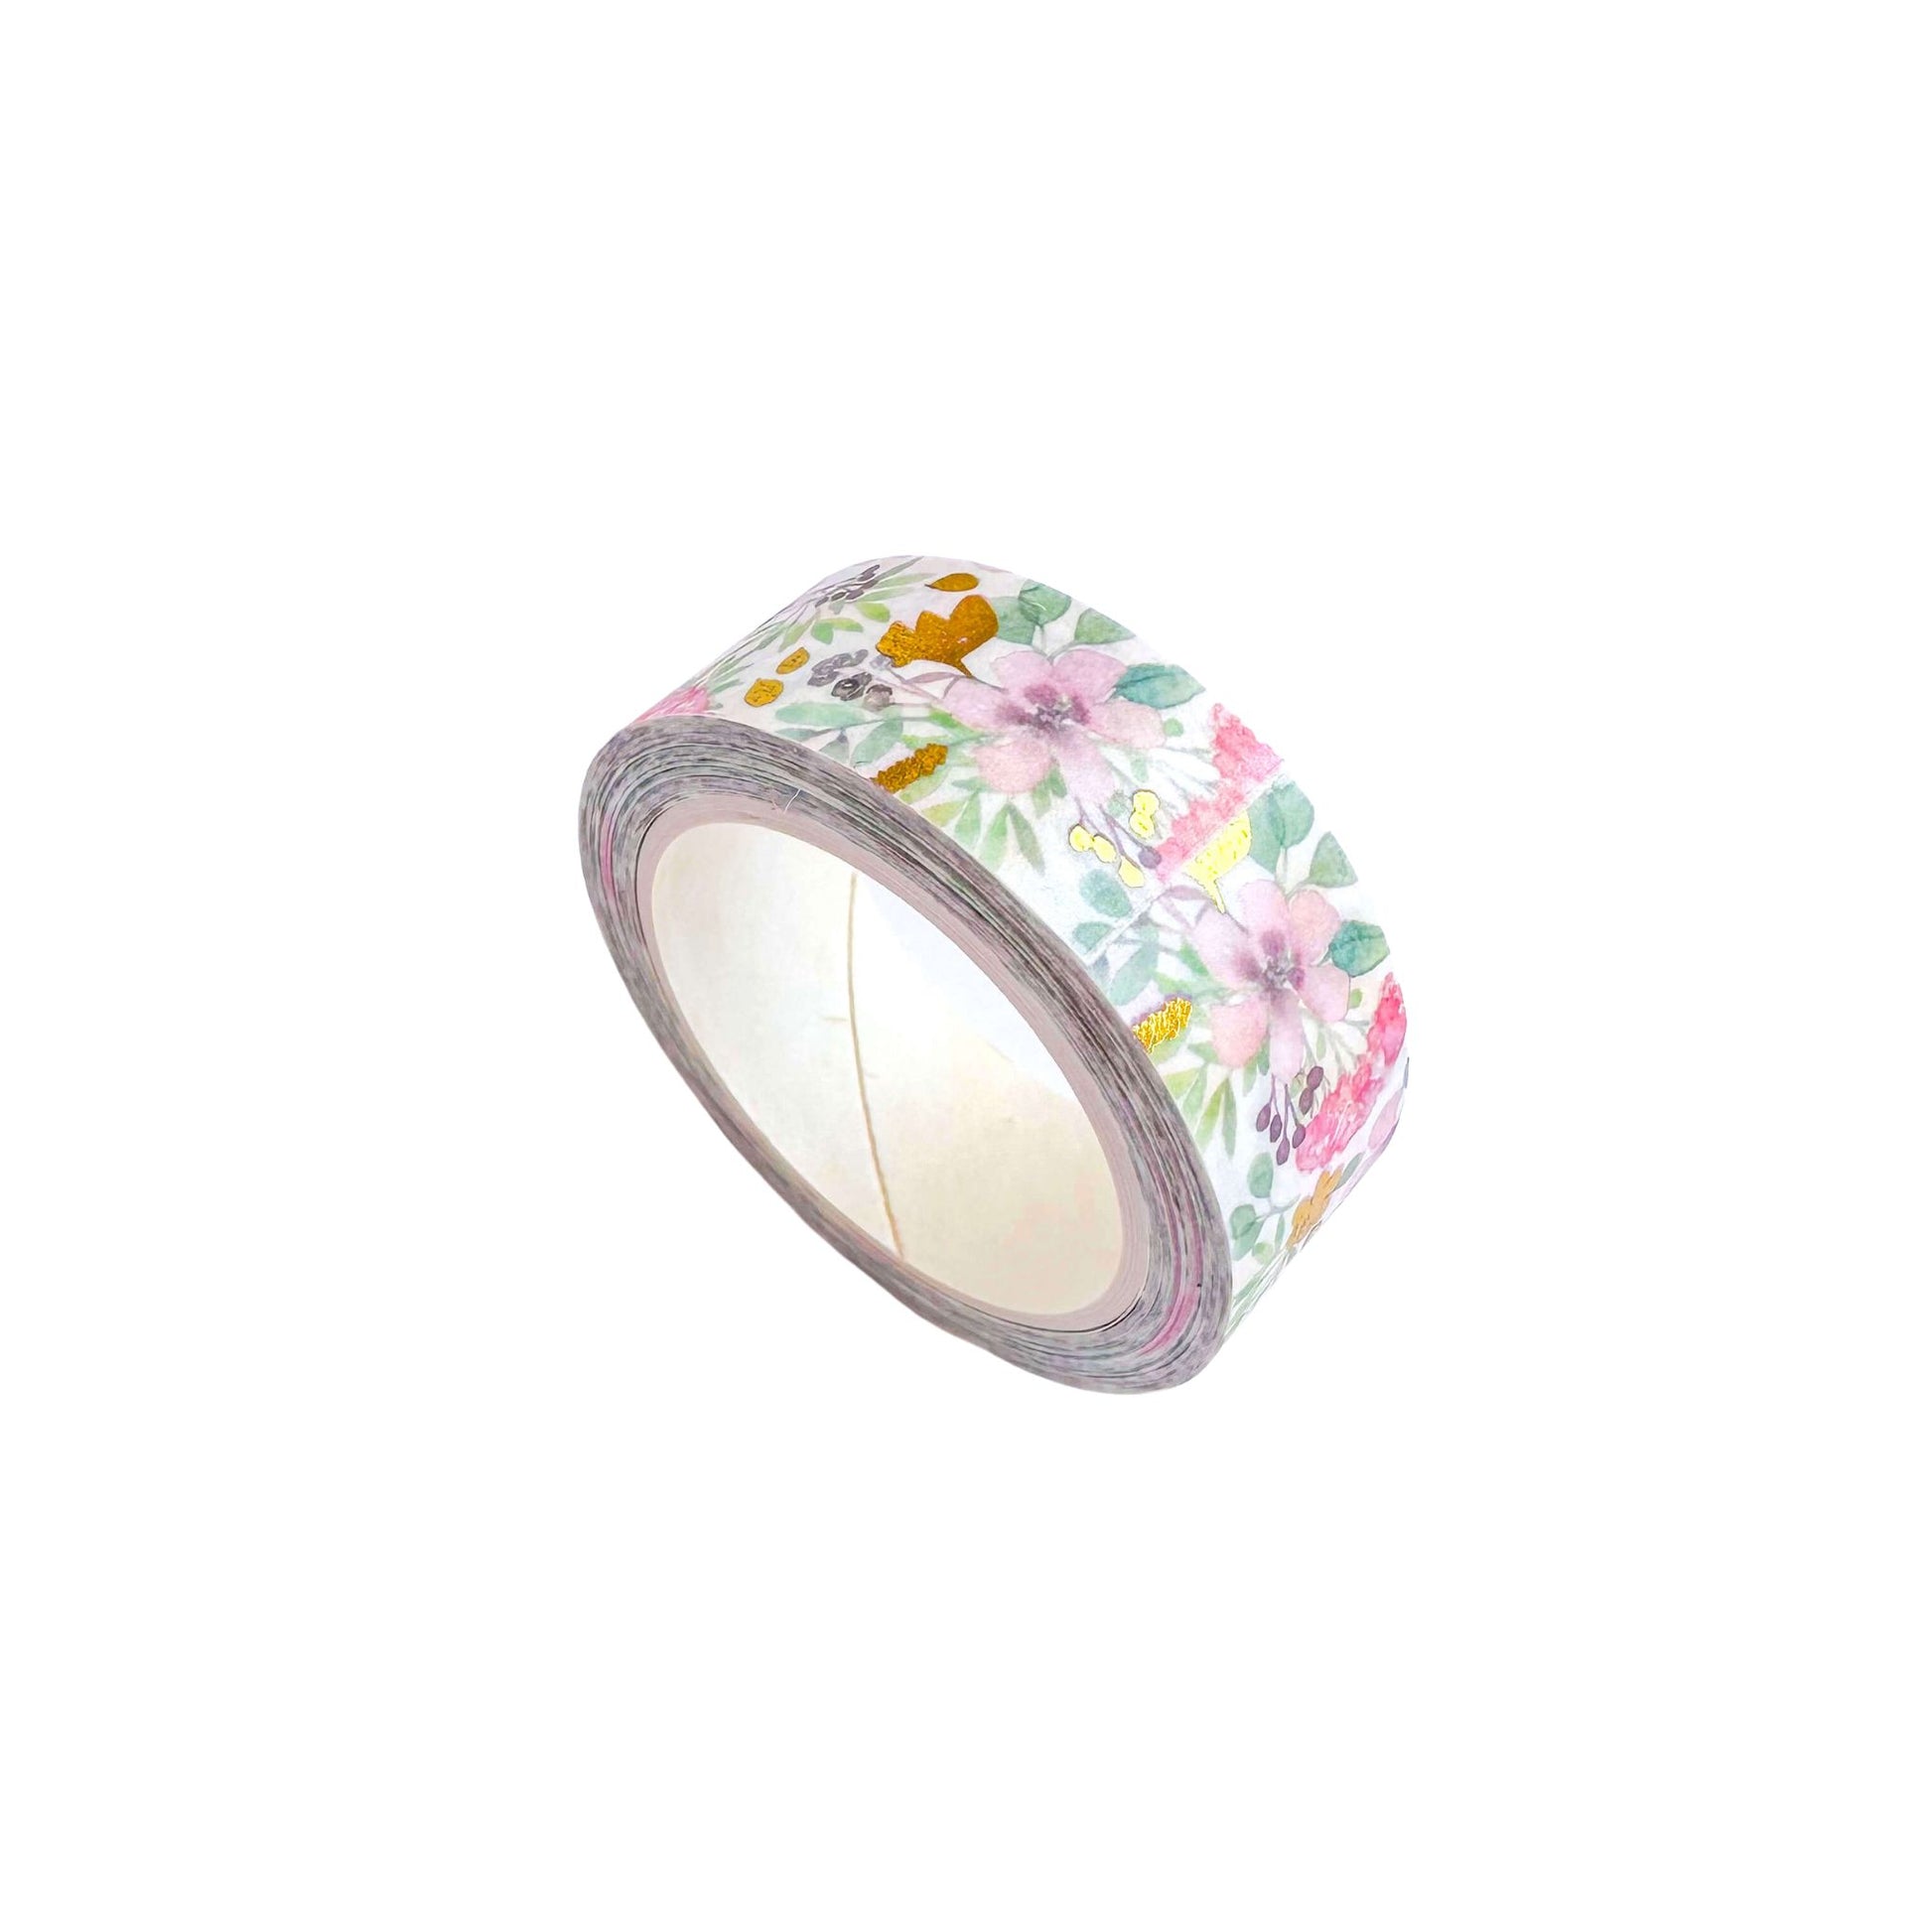 Pink flowers with green leaves and gold detail washi tape roll